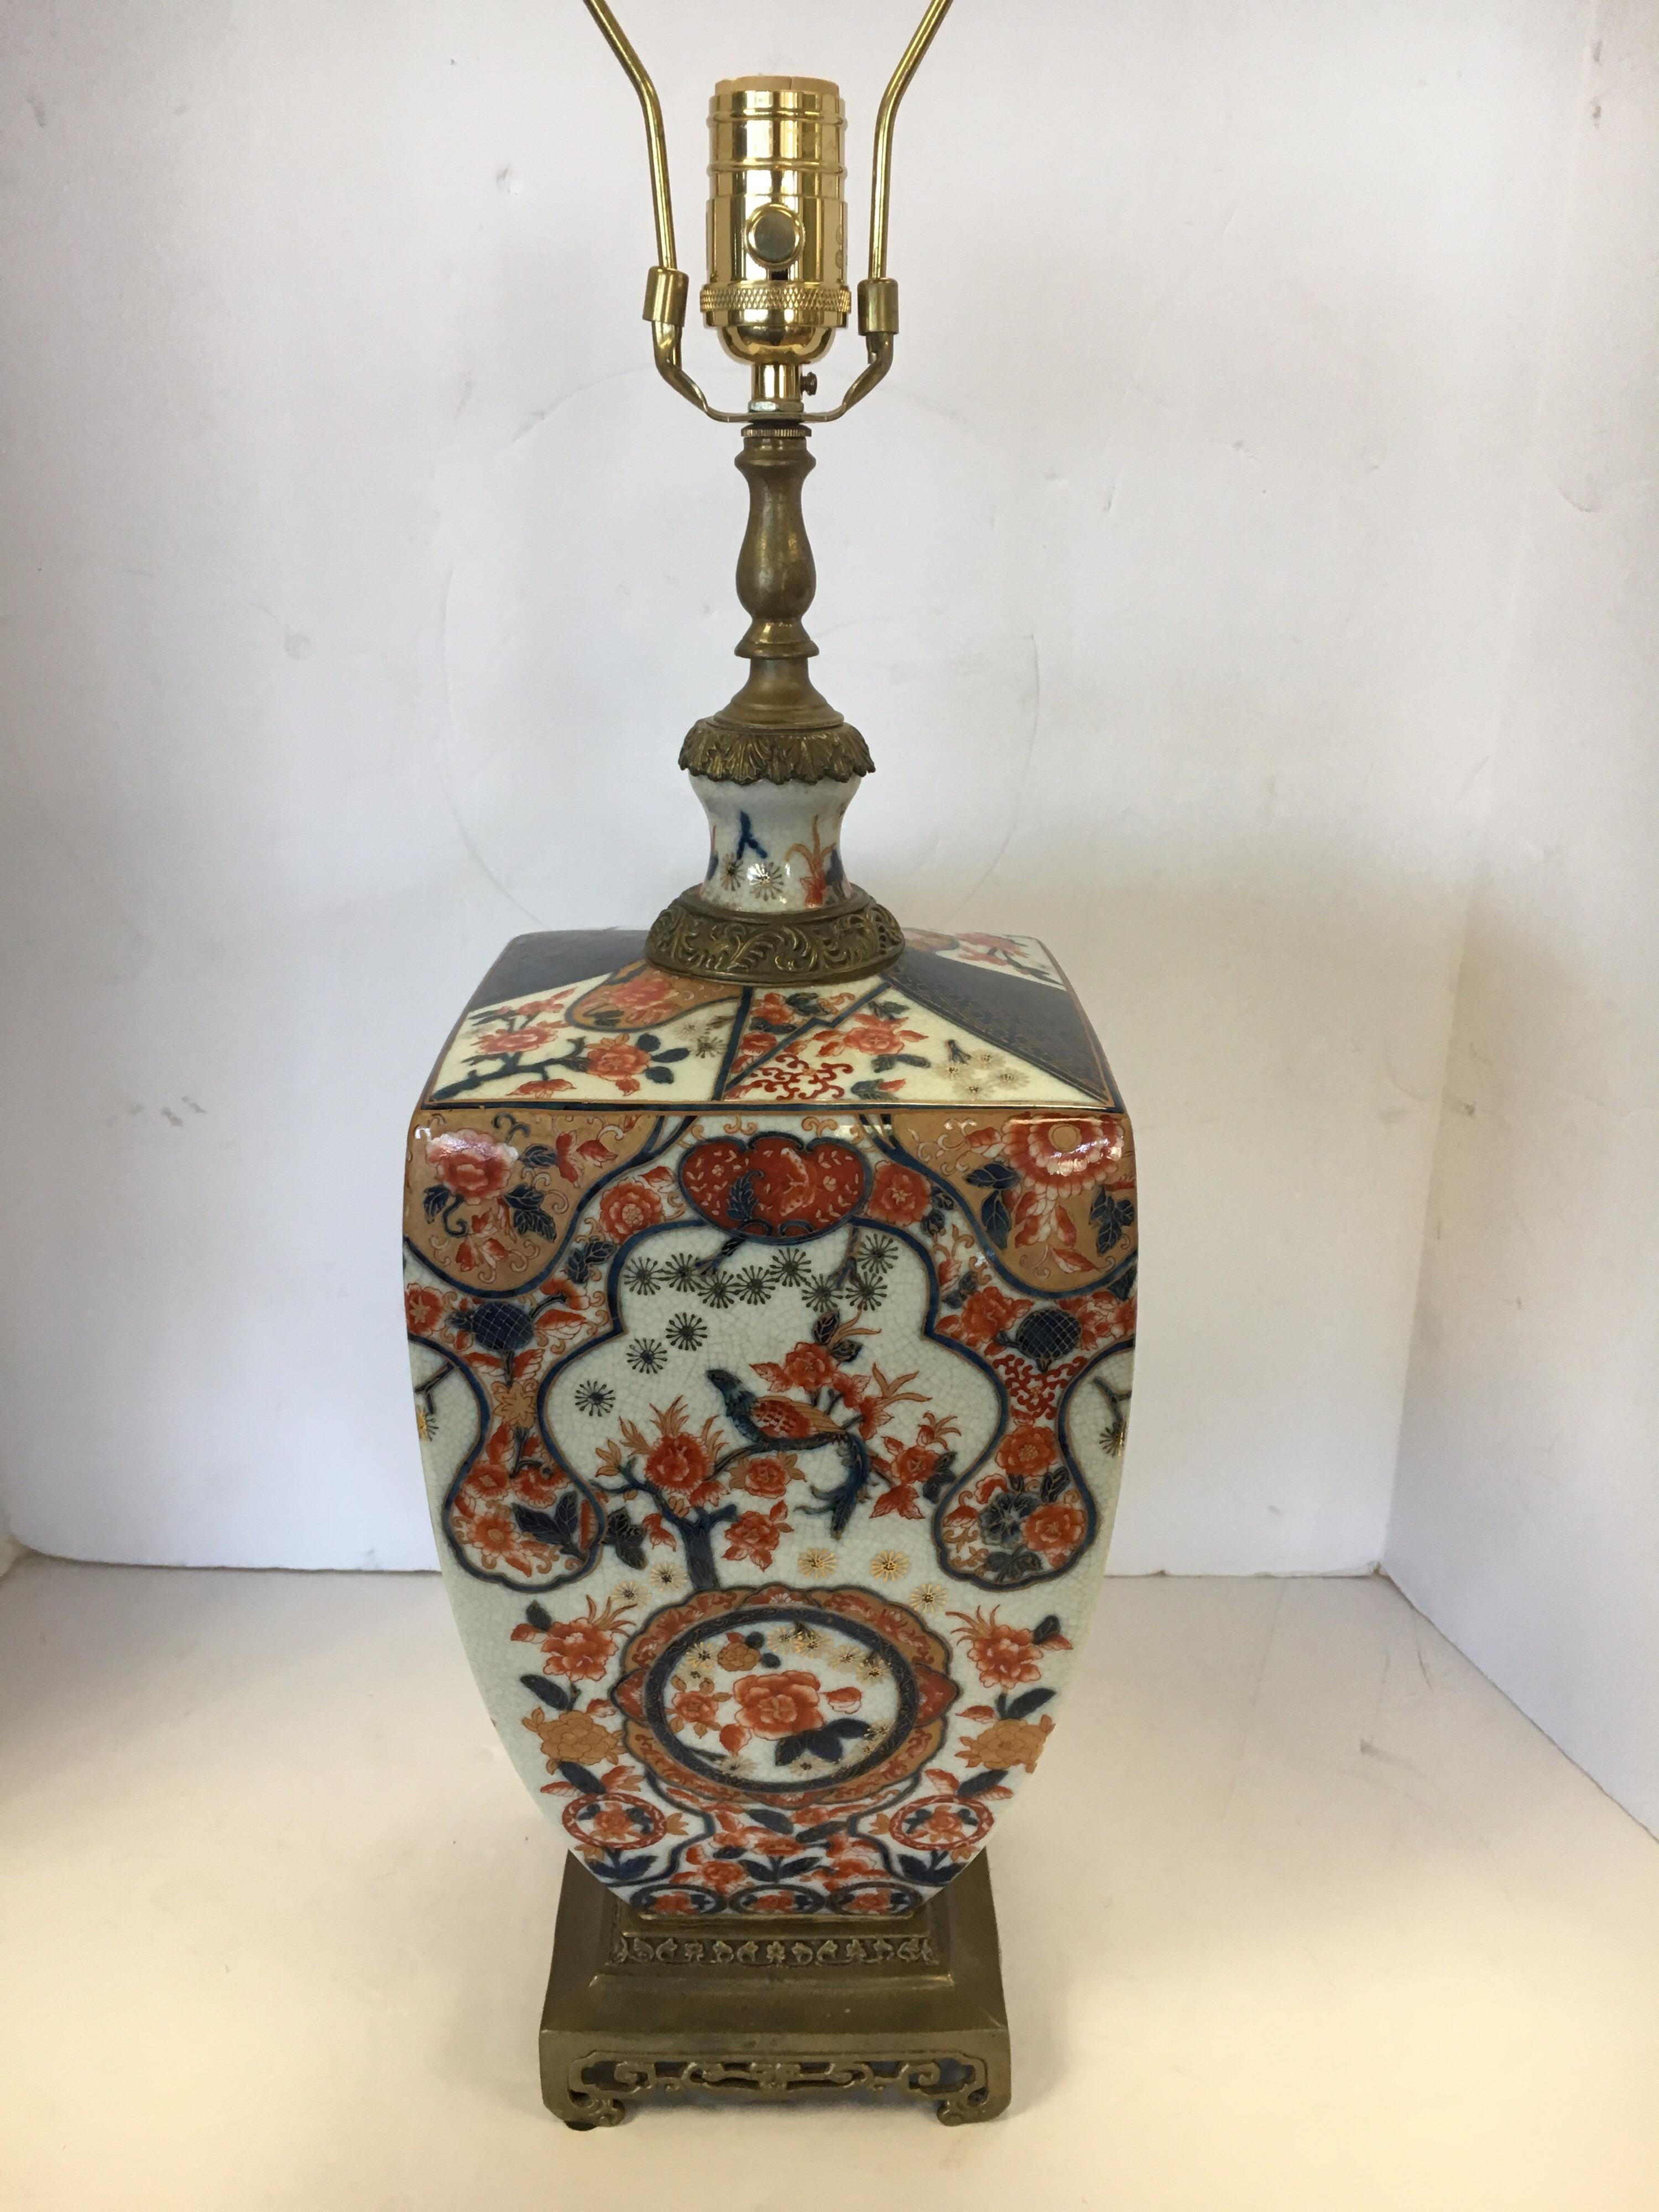 Gorgeous Asian inspired table lamp with vibrant colors throughout. Wired for USA and in perfect working order.